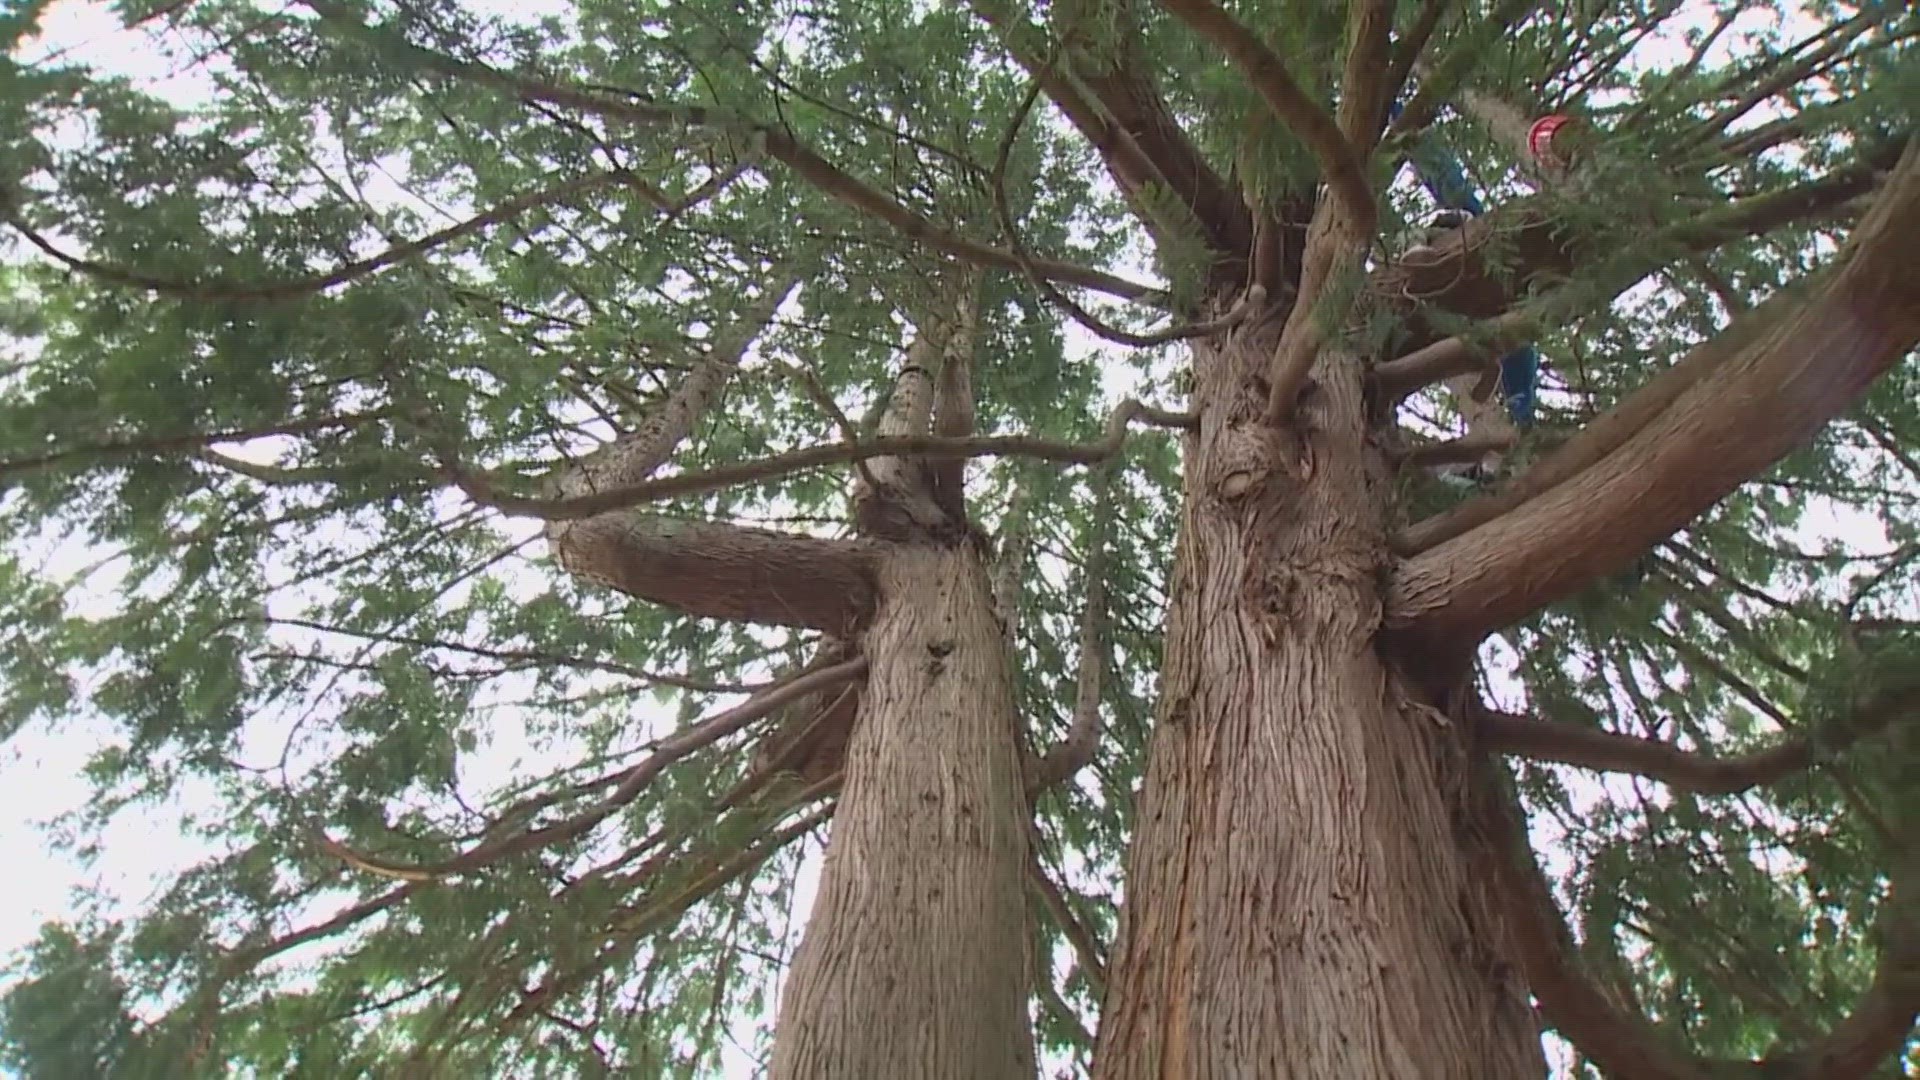 A western red cedar tree in Seattle’s Wedgwood neighborhood that was slated to be chopped down has been saved.